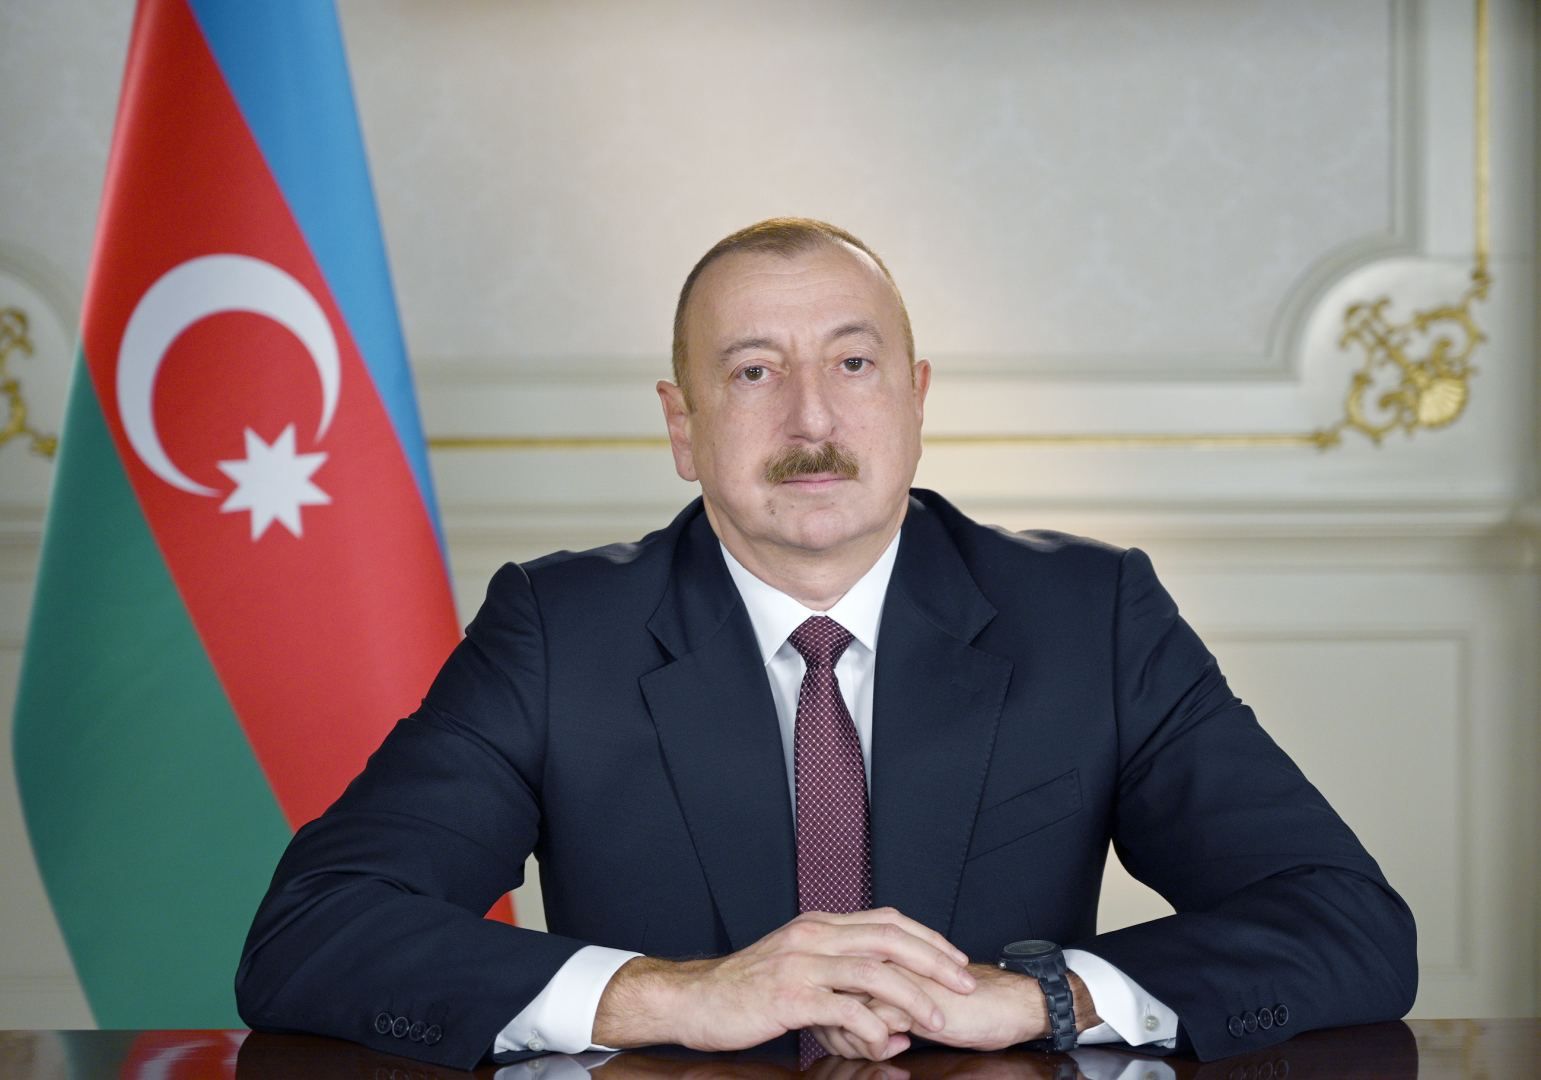 Azerbaijan State Commission structure on combating drug addiction, illicit trafficking of narcotic drugs changed - decree